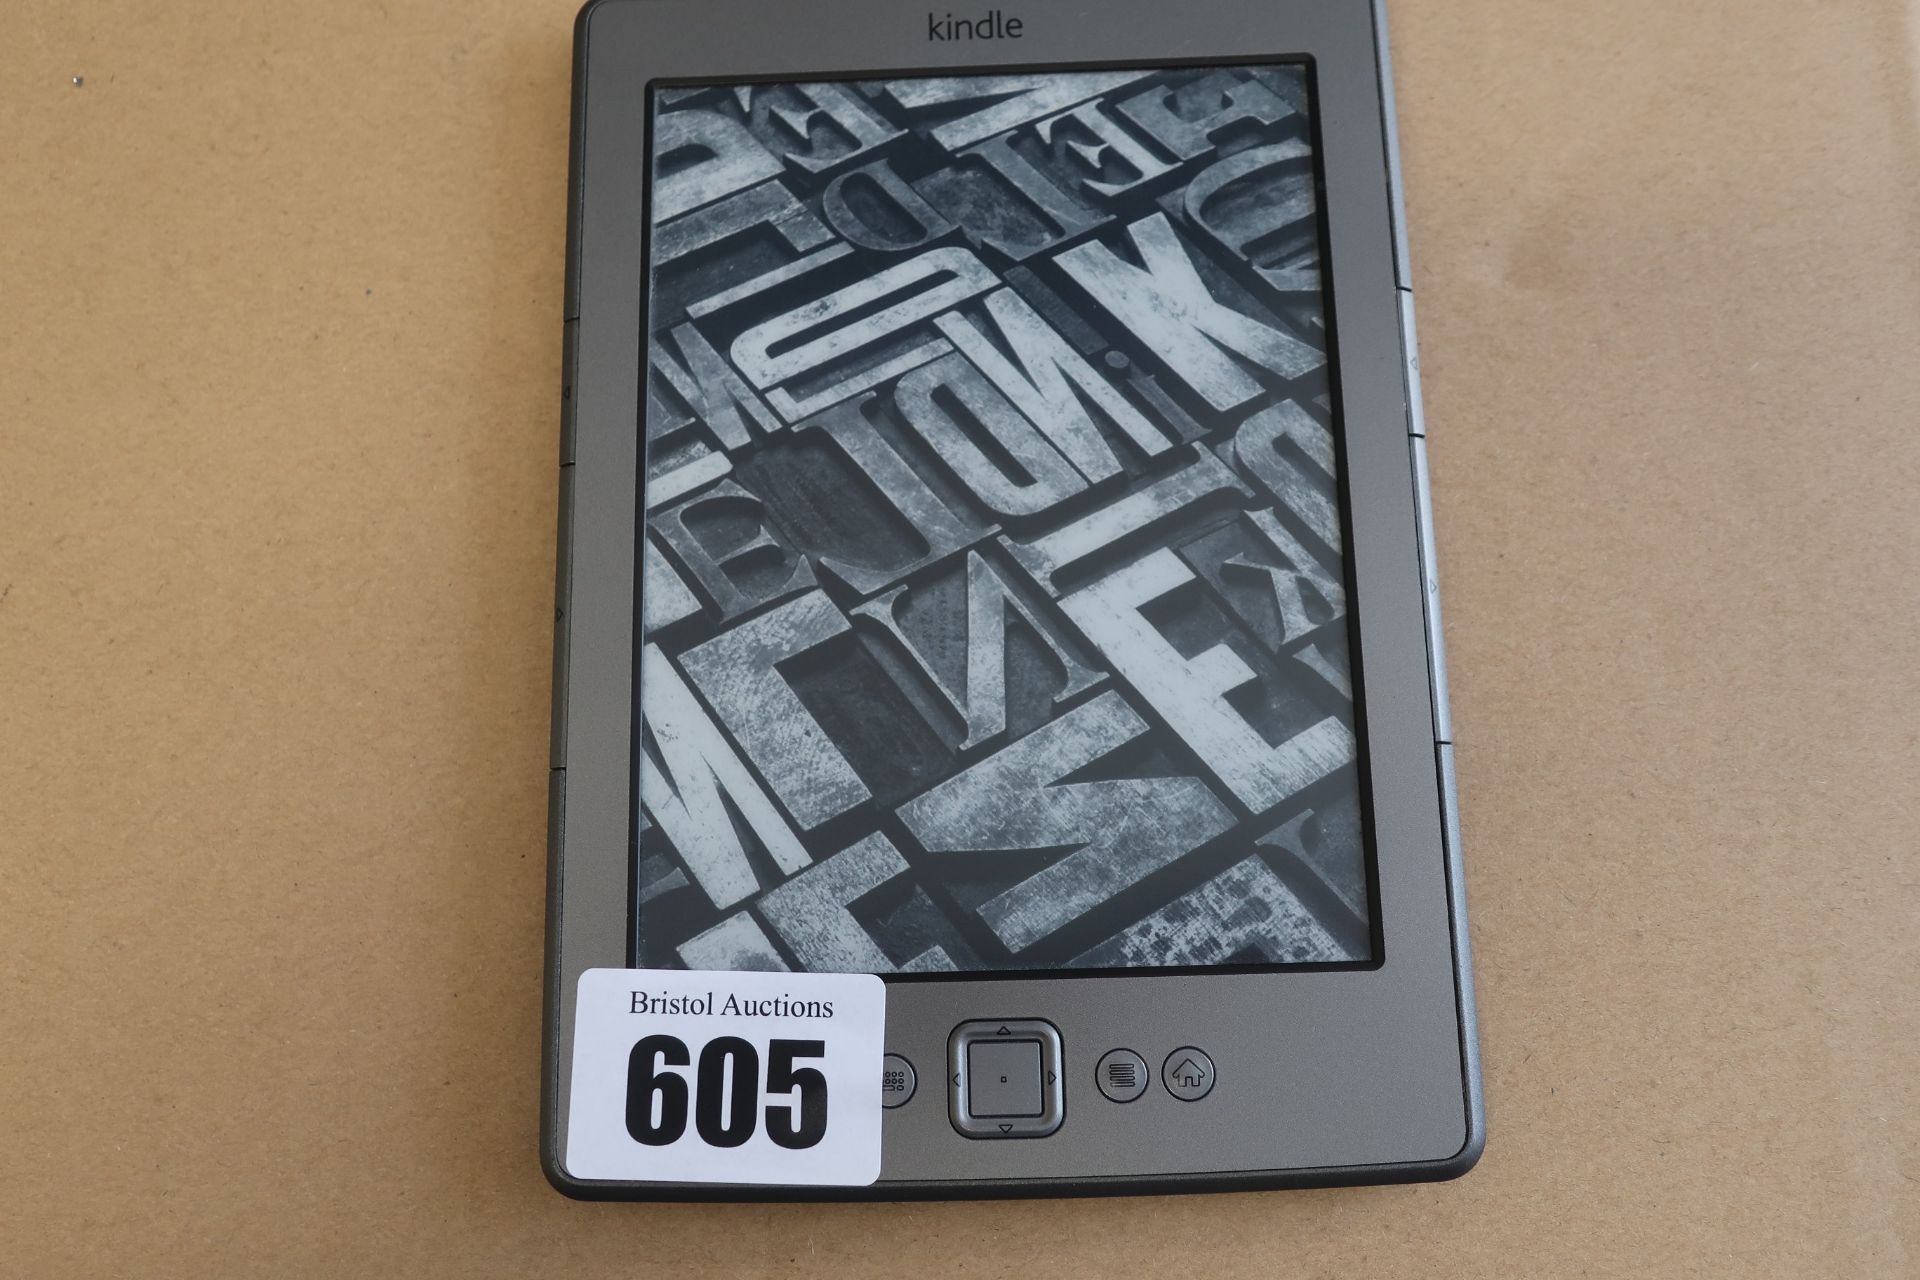 A pre-owned Amazon Kindle (D01100) 6” E-Reader in Grey.